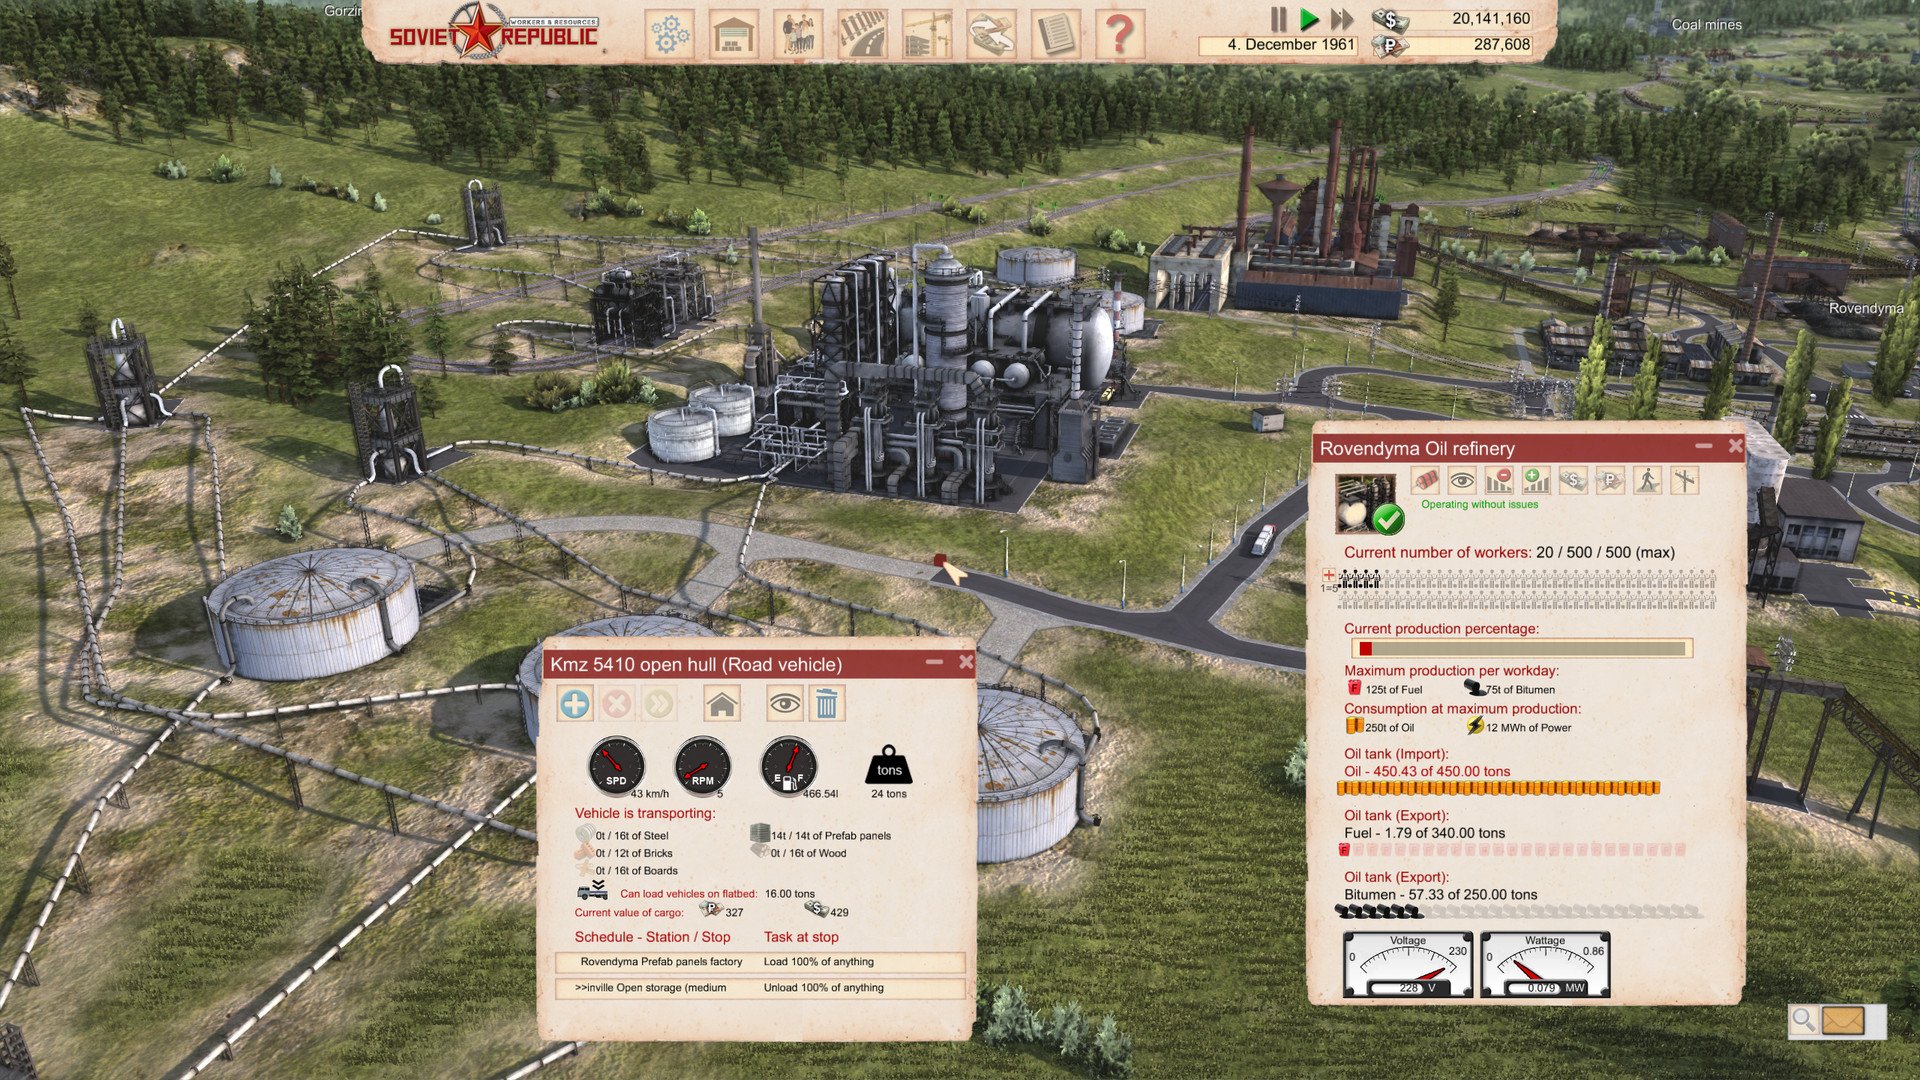 Screenshot for the game Workers & Resources: Soviet Republic [0.8.3.20 ] (2019) download torrent repack